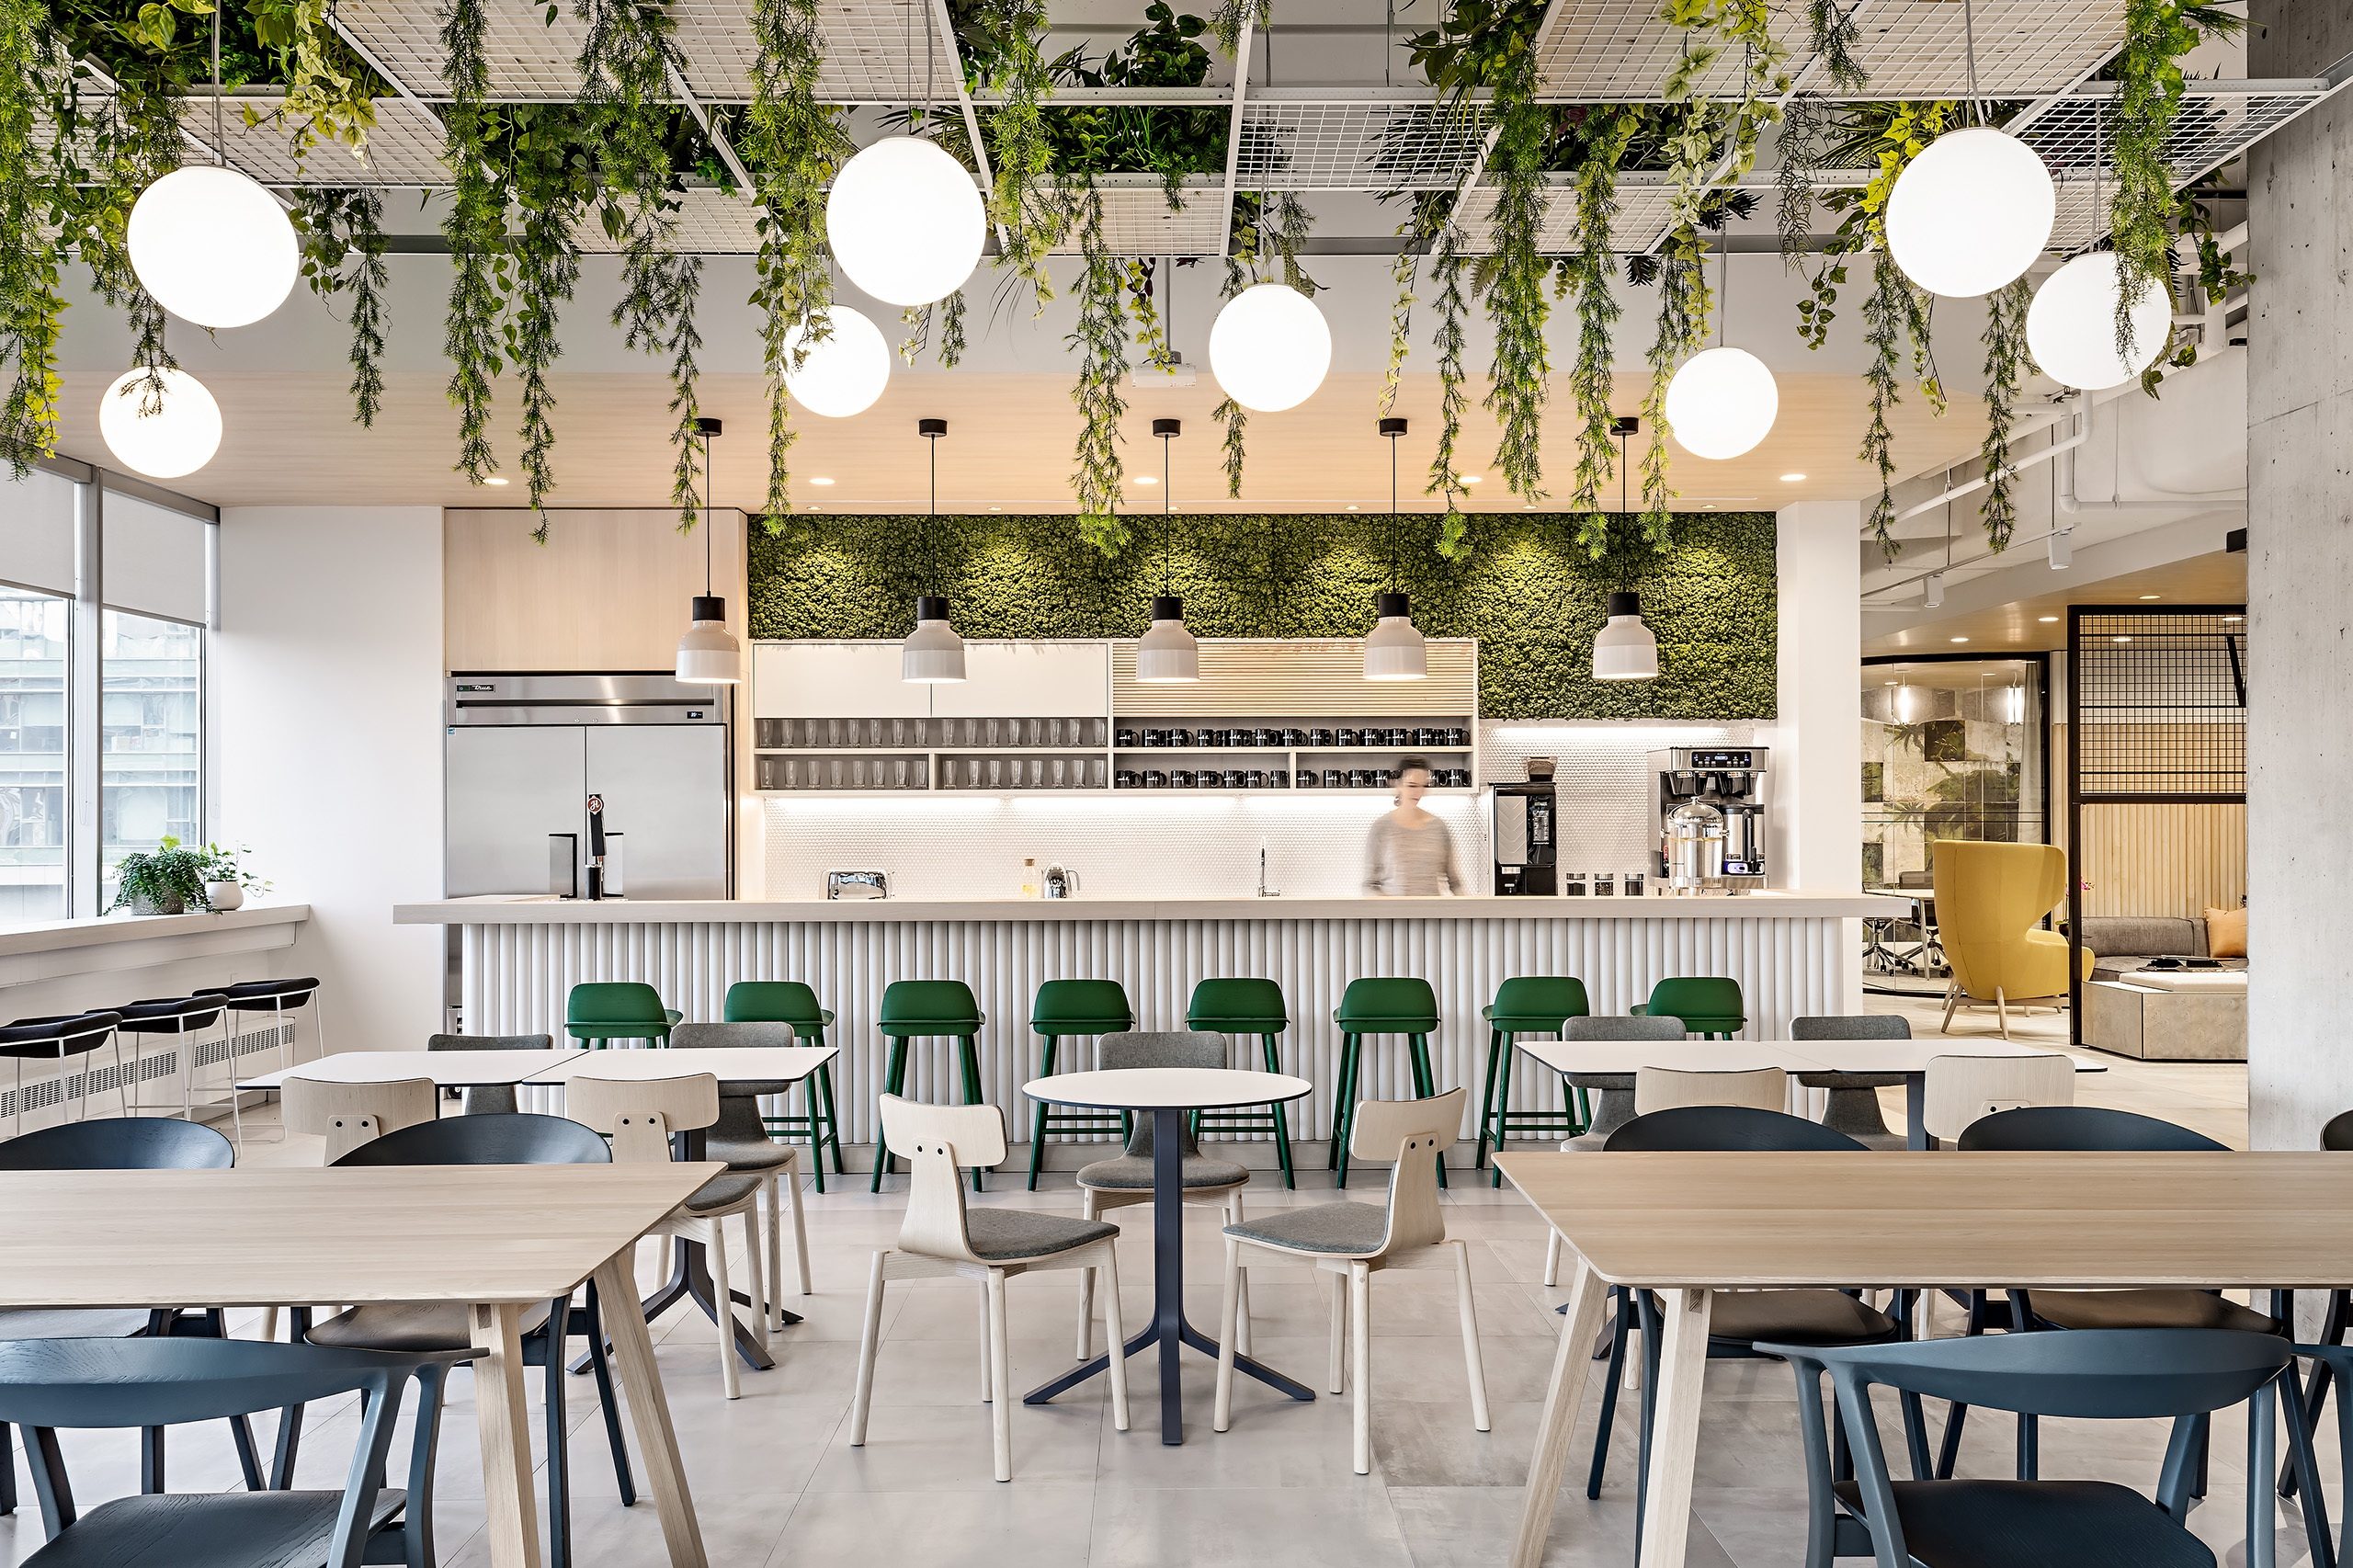 Bar at office kitchen with green accents